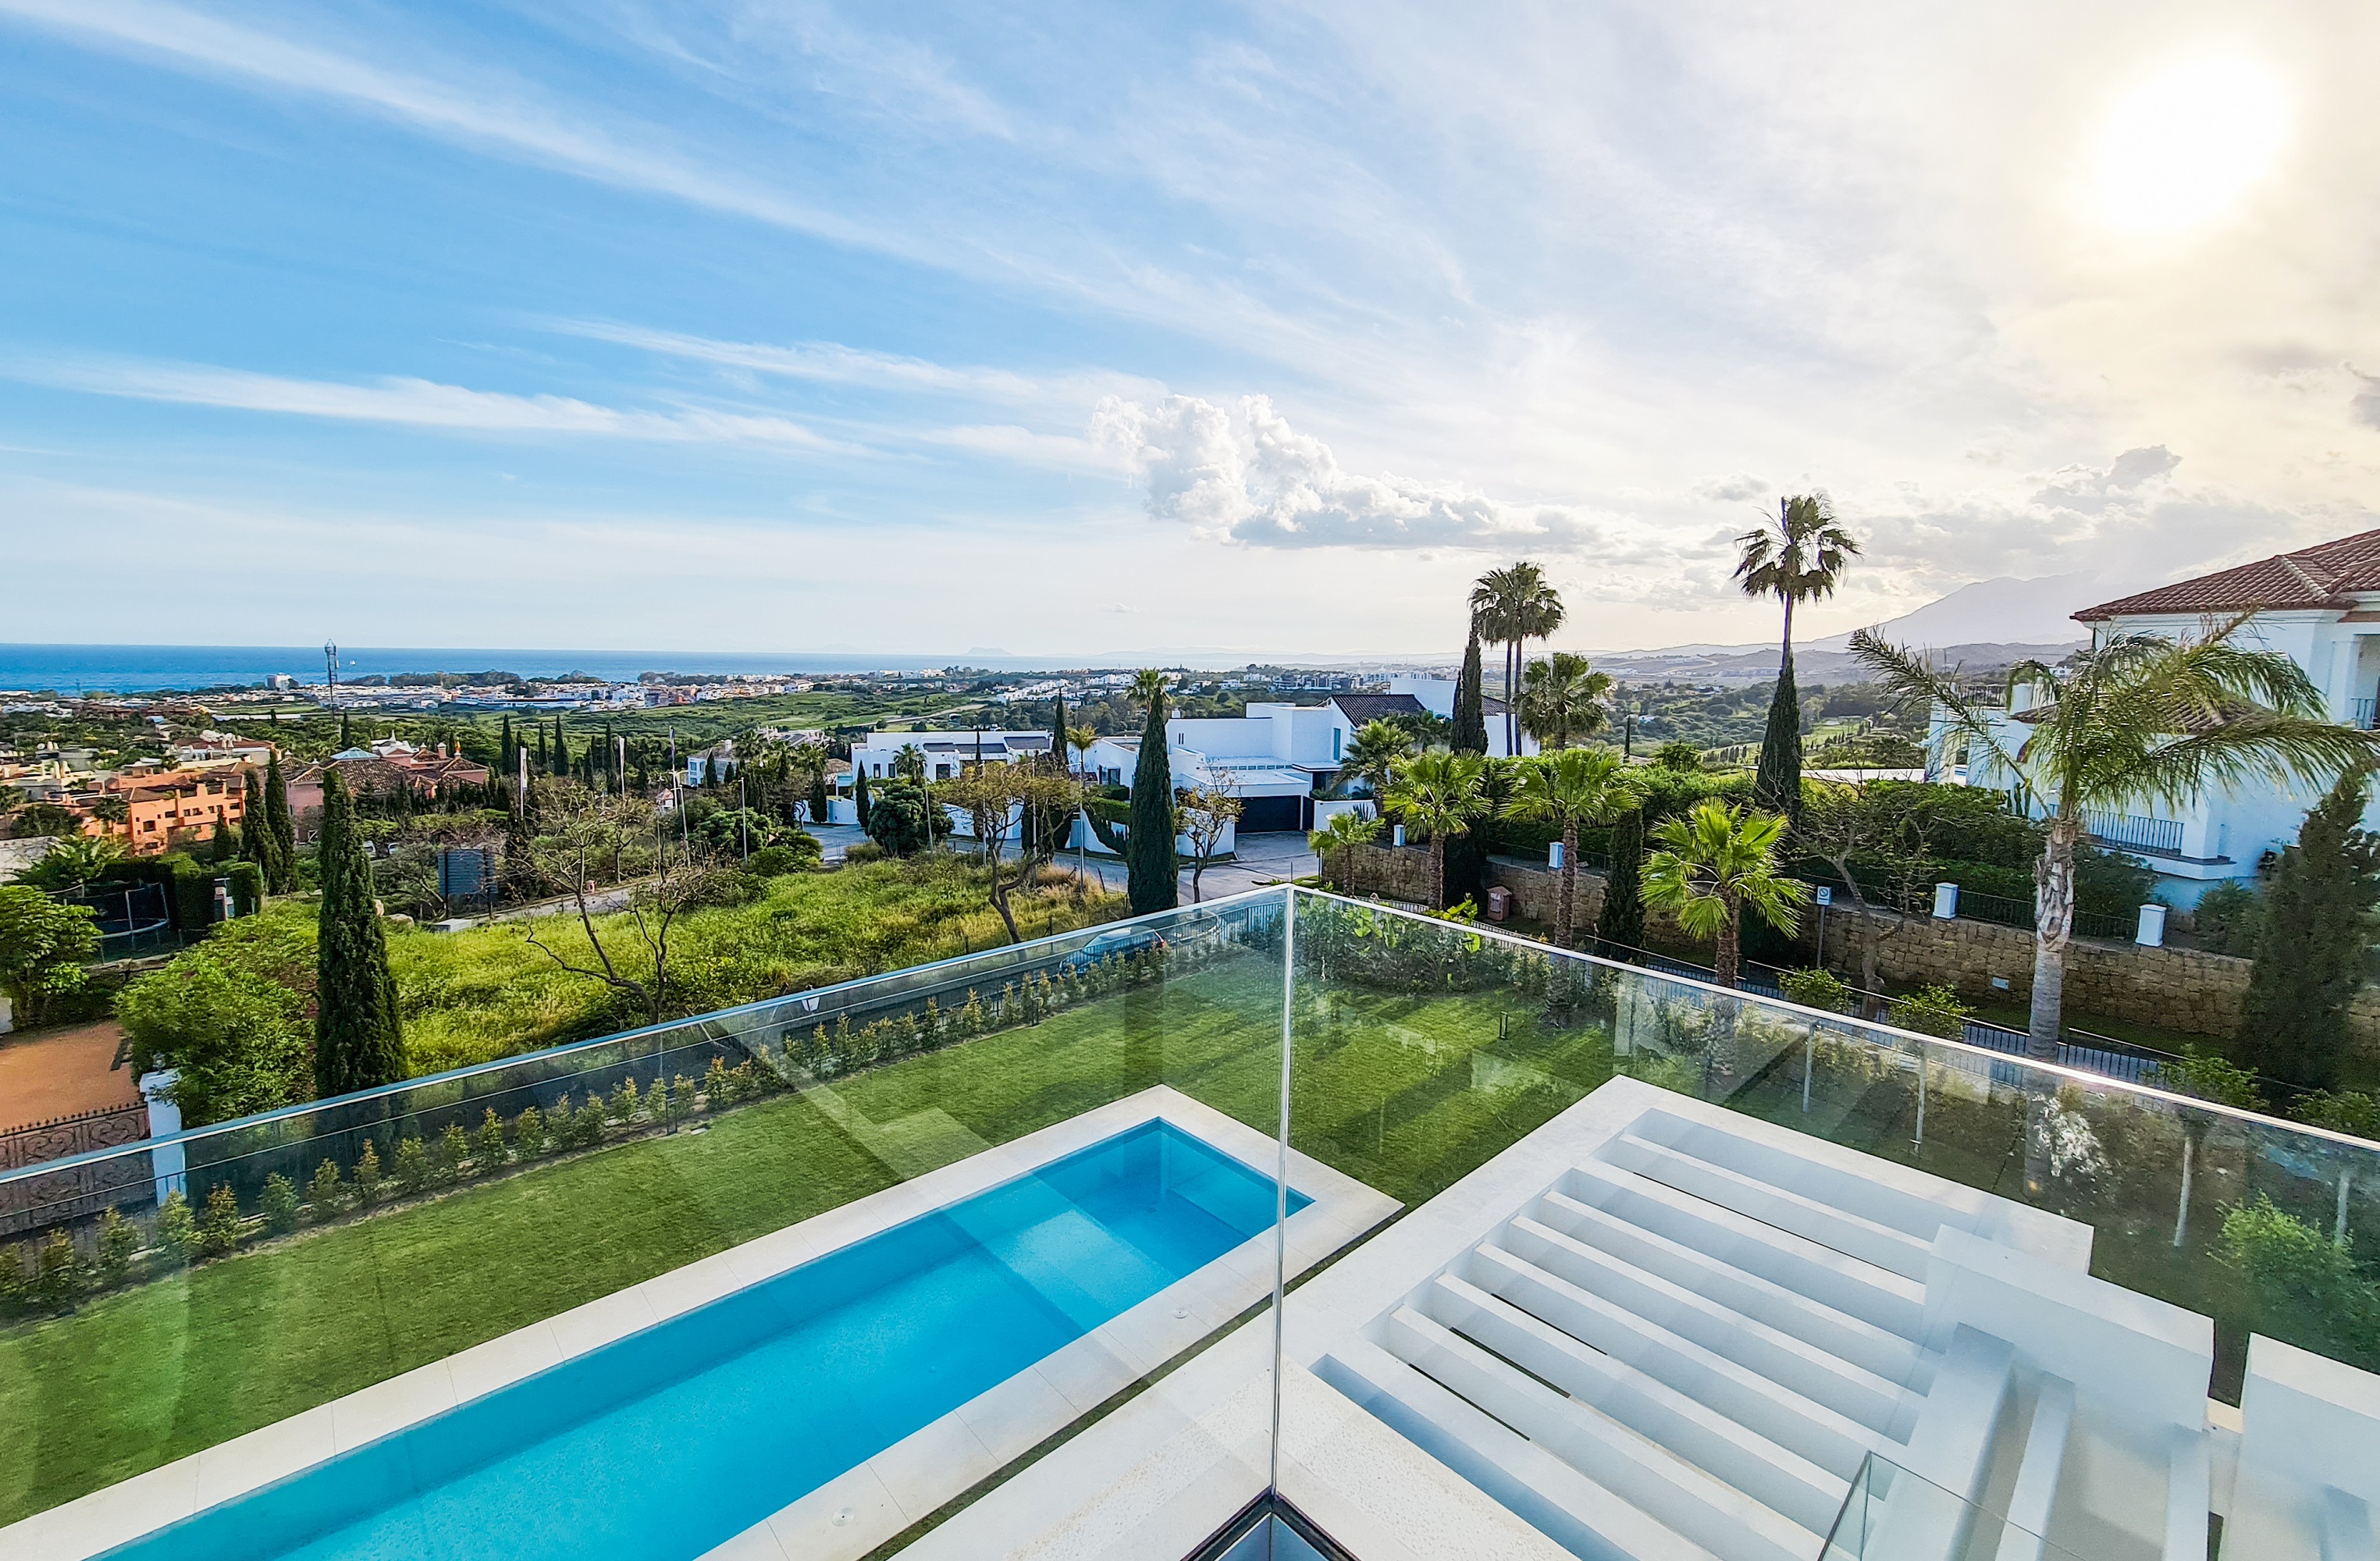 Property for sale in marbella